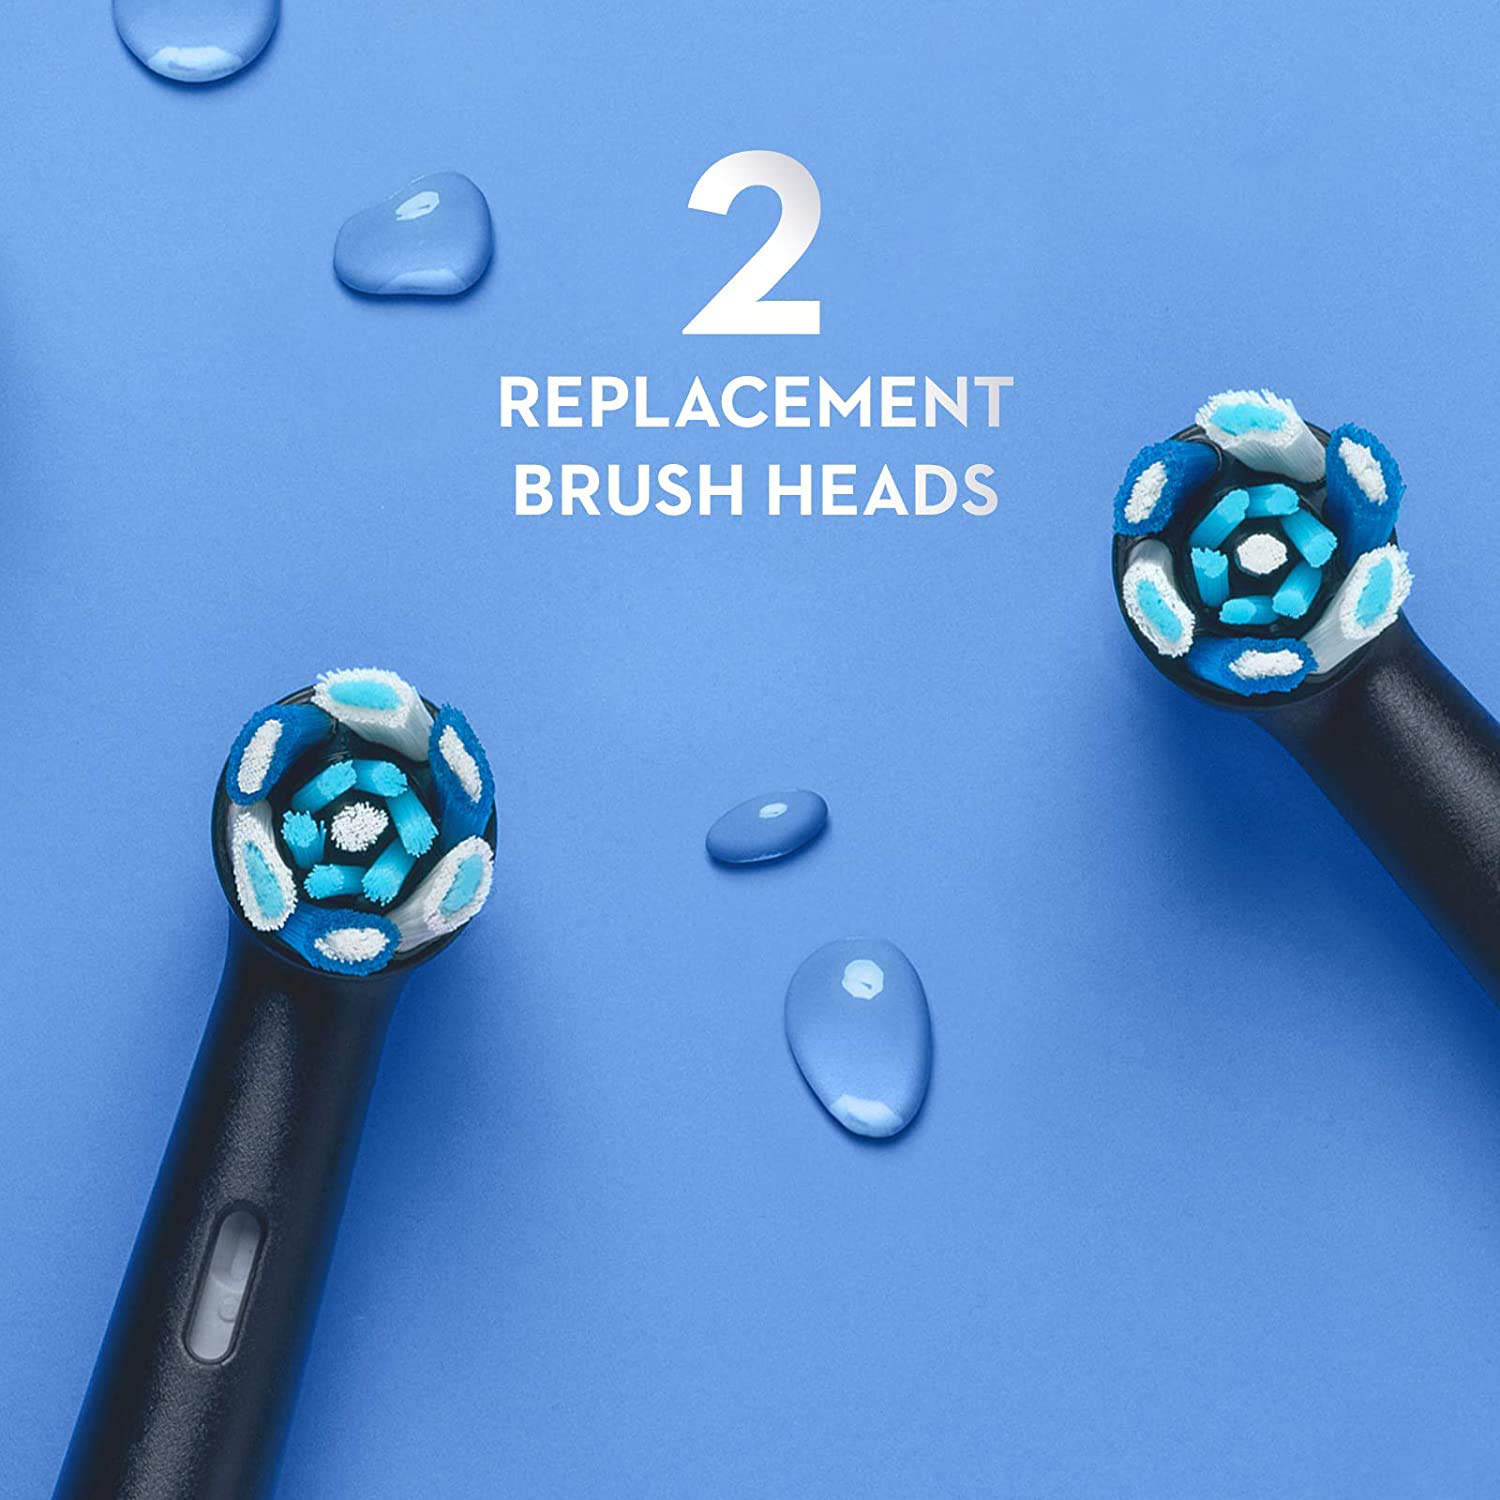 Oral-B iO Ultimate Clean Replacement Brush Heads, Black, 2 Count